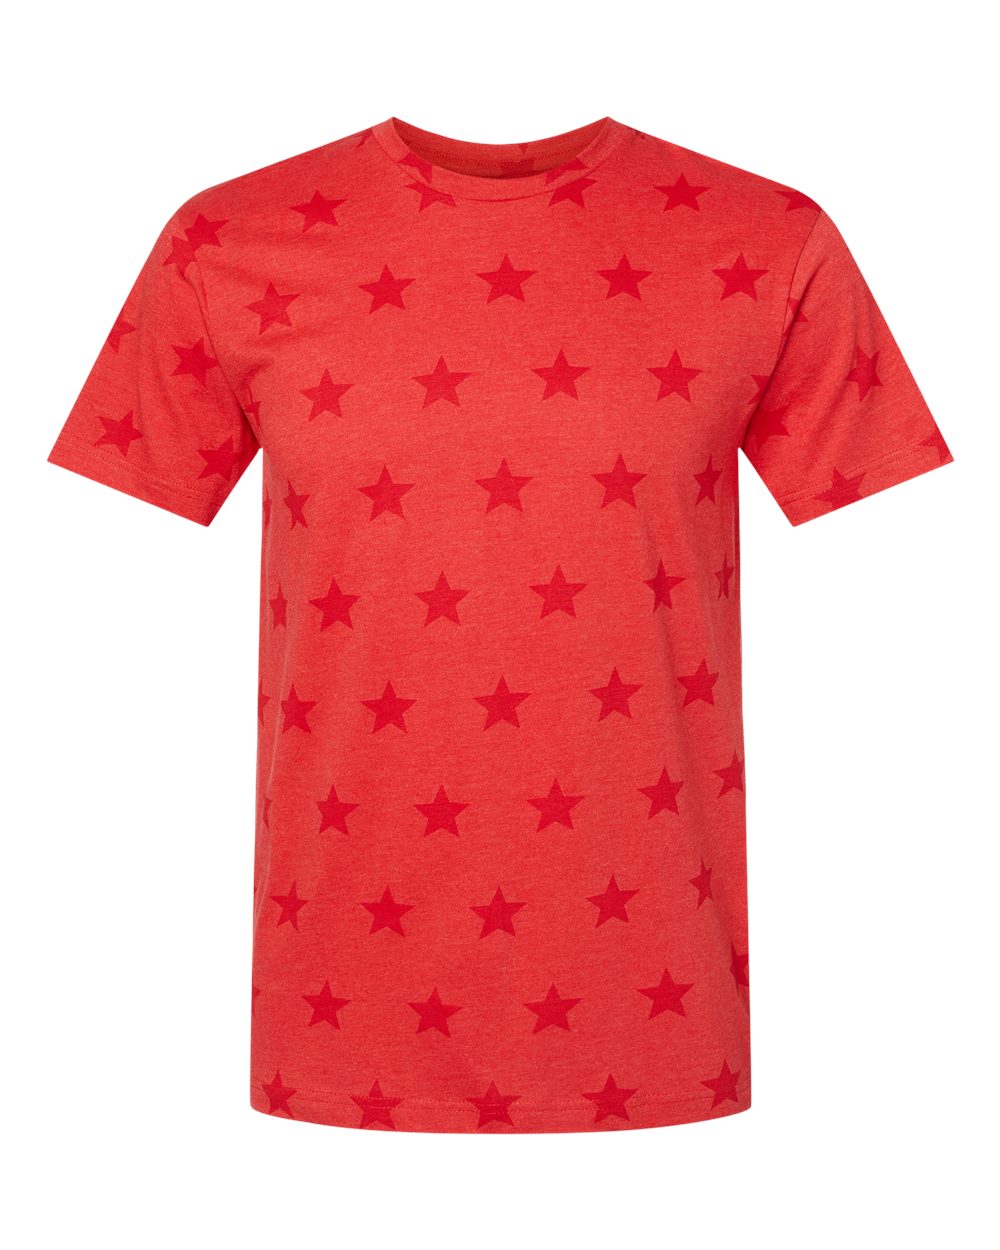 Red Star Print Top - T9430RD